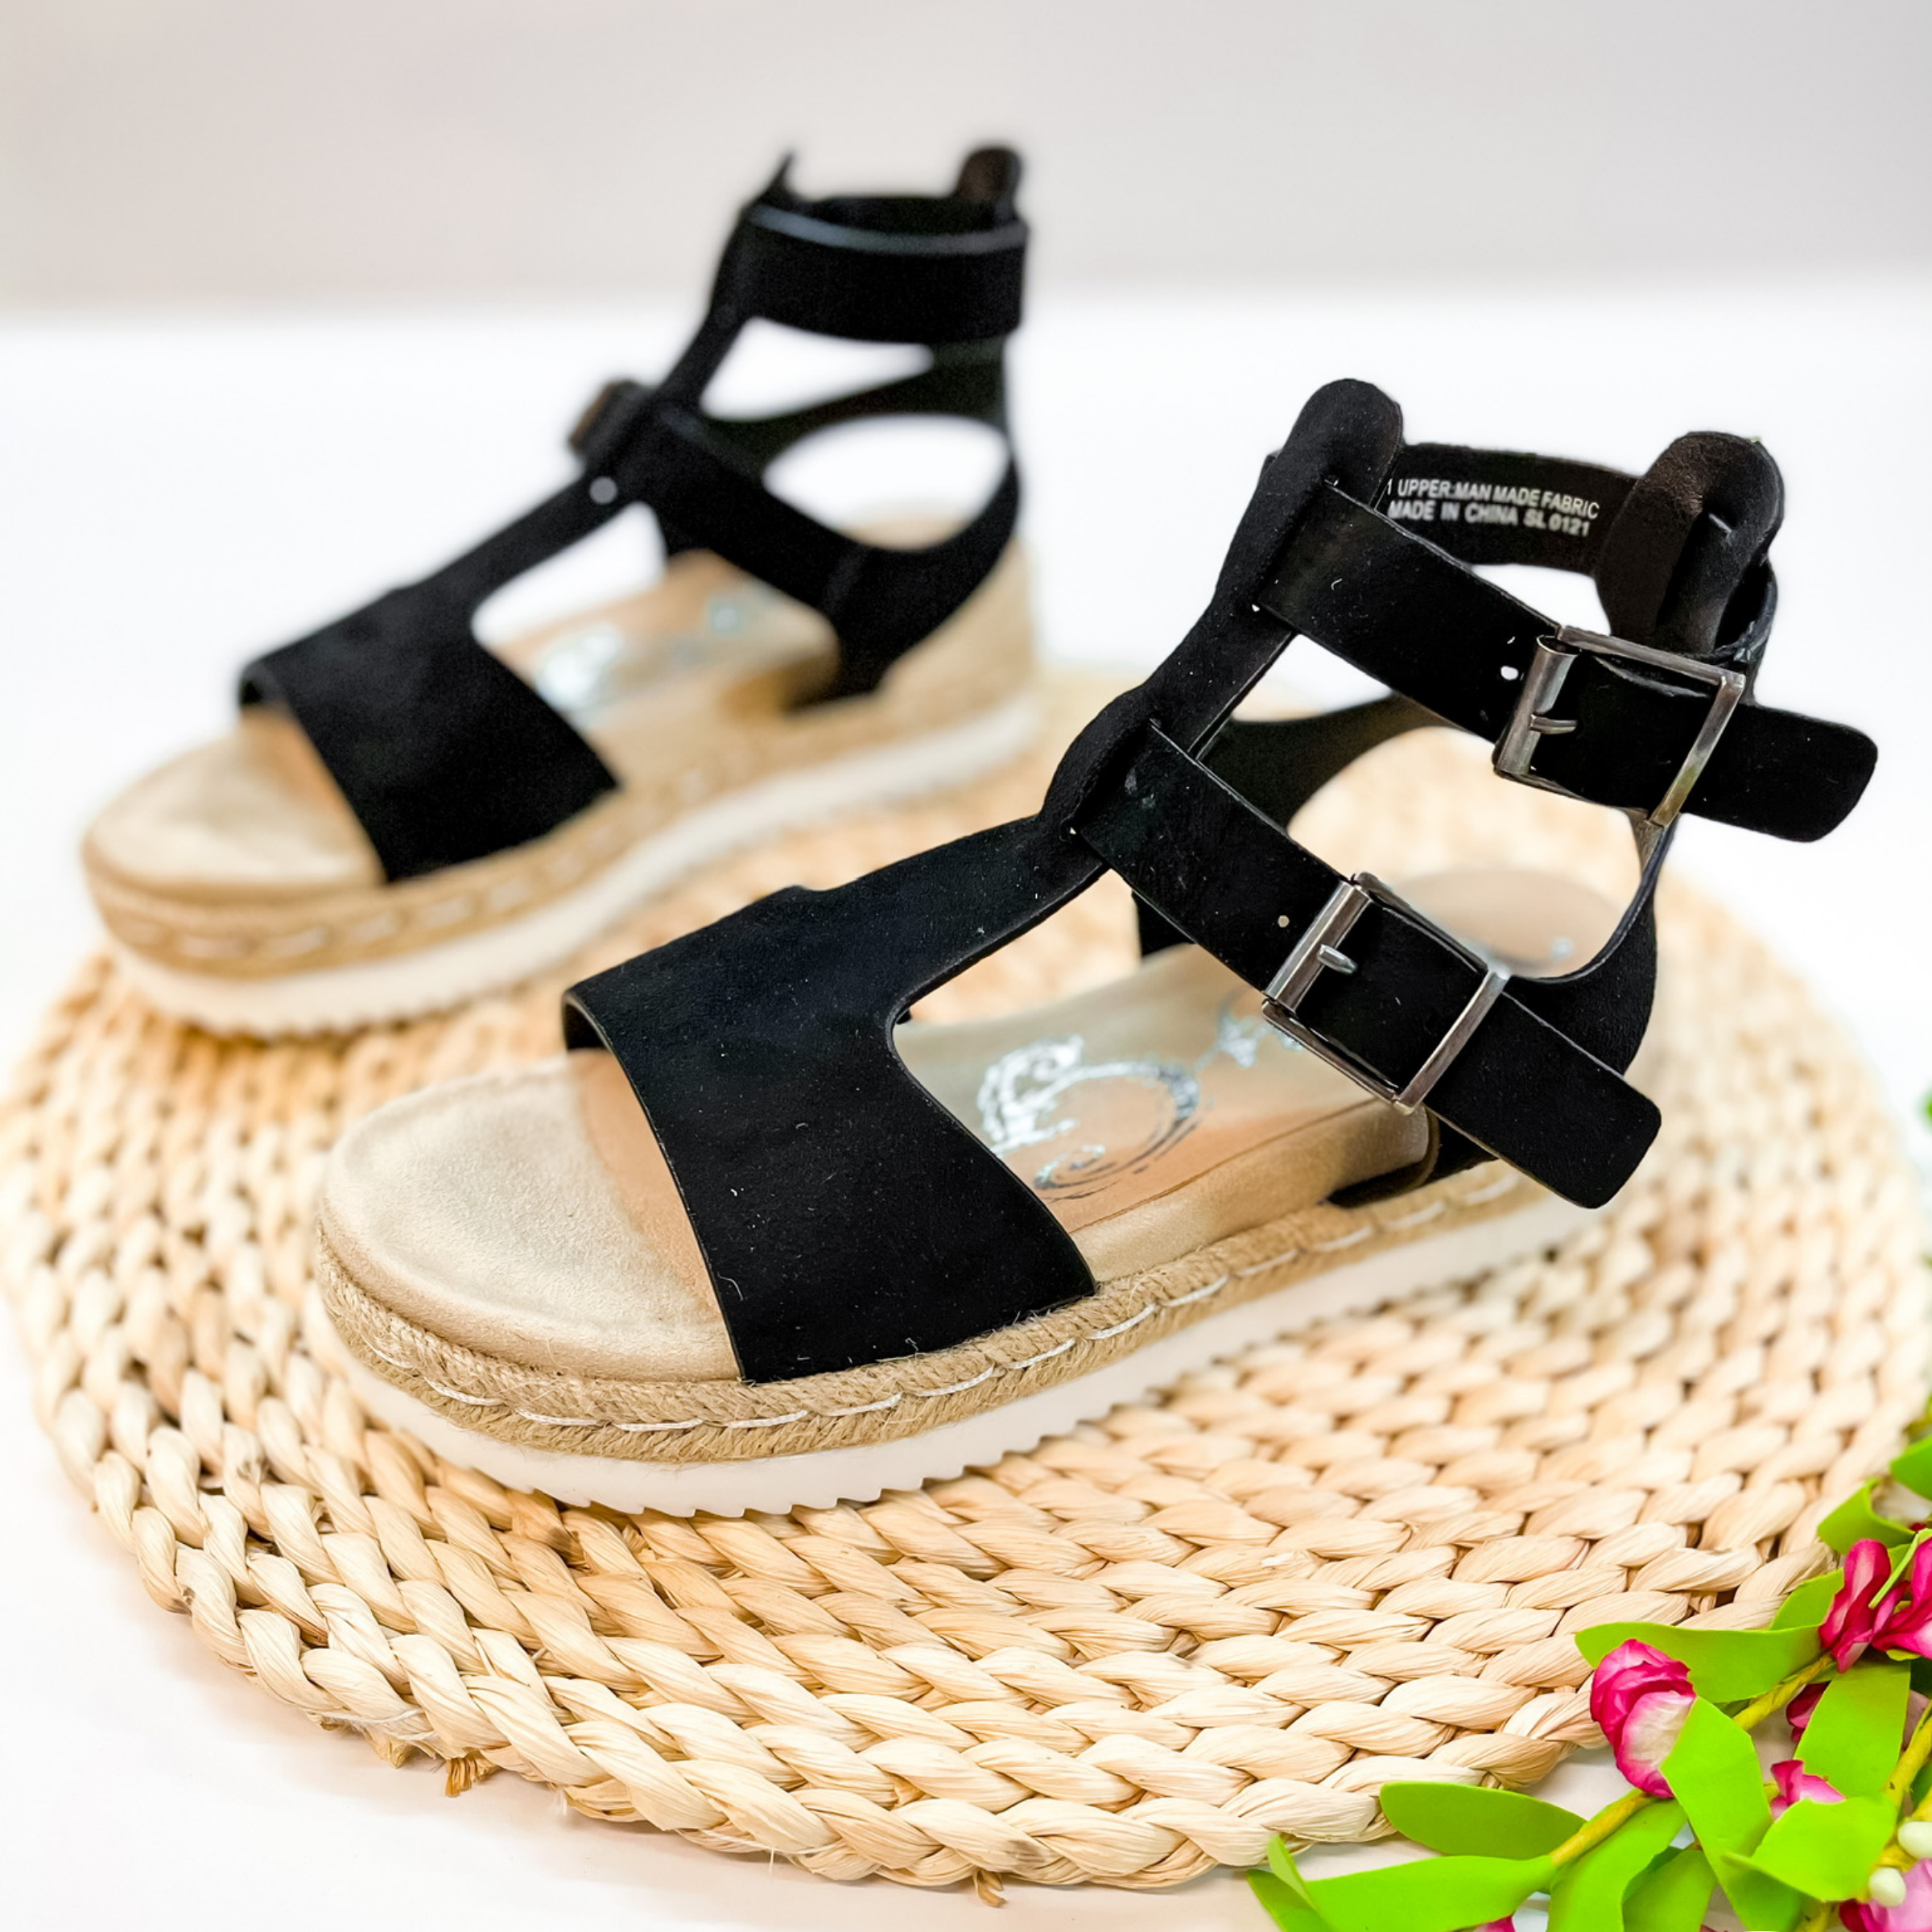 Very G | Coming In Hot Strappy Double Buckle Platform Sandals in Black Suede - Giddy Up Glamour Boutique